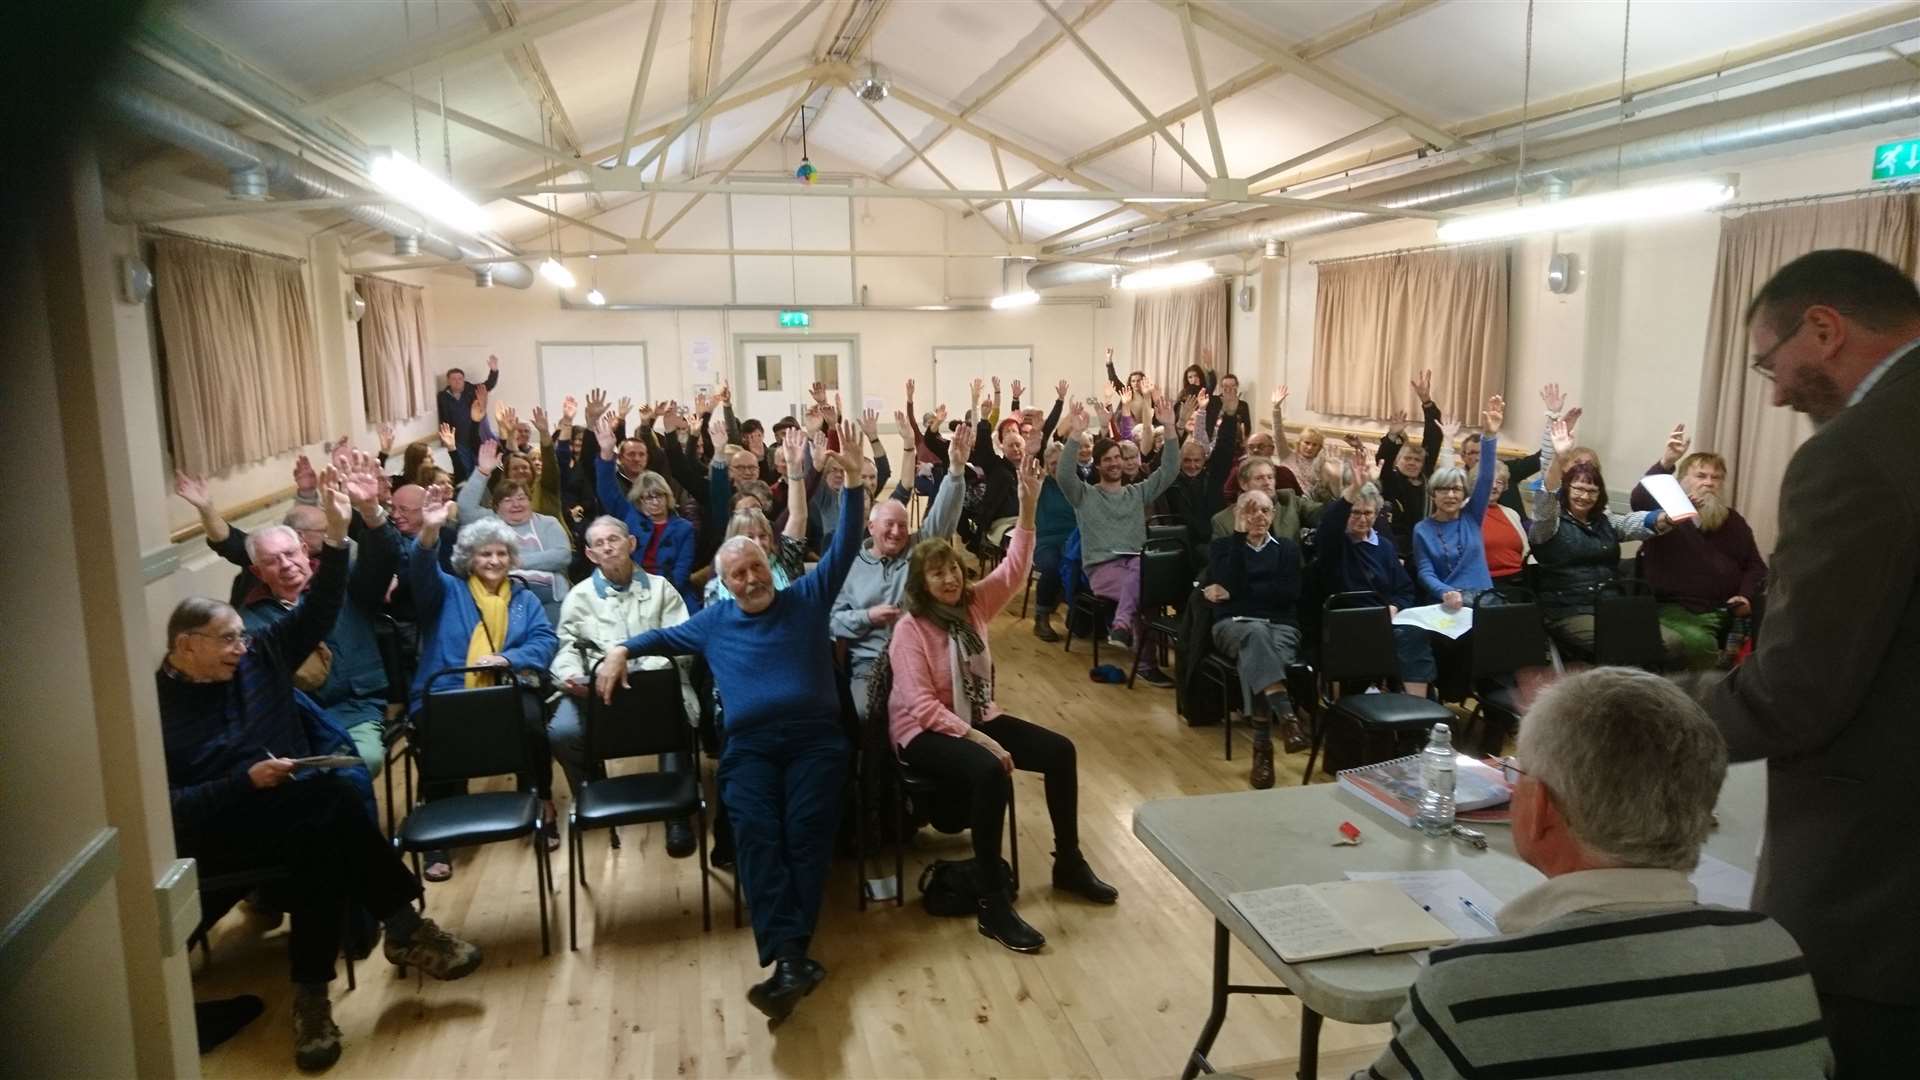 Save Fant Farm has not been able to organise a public meeting since this one in February, thanks to Covid